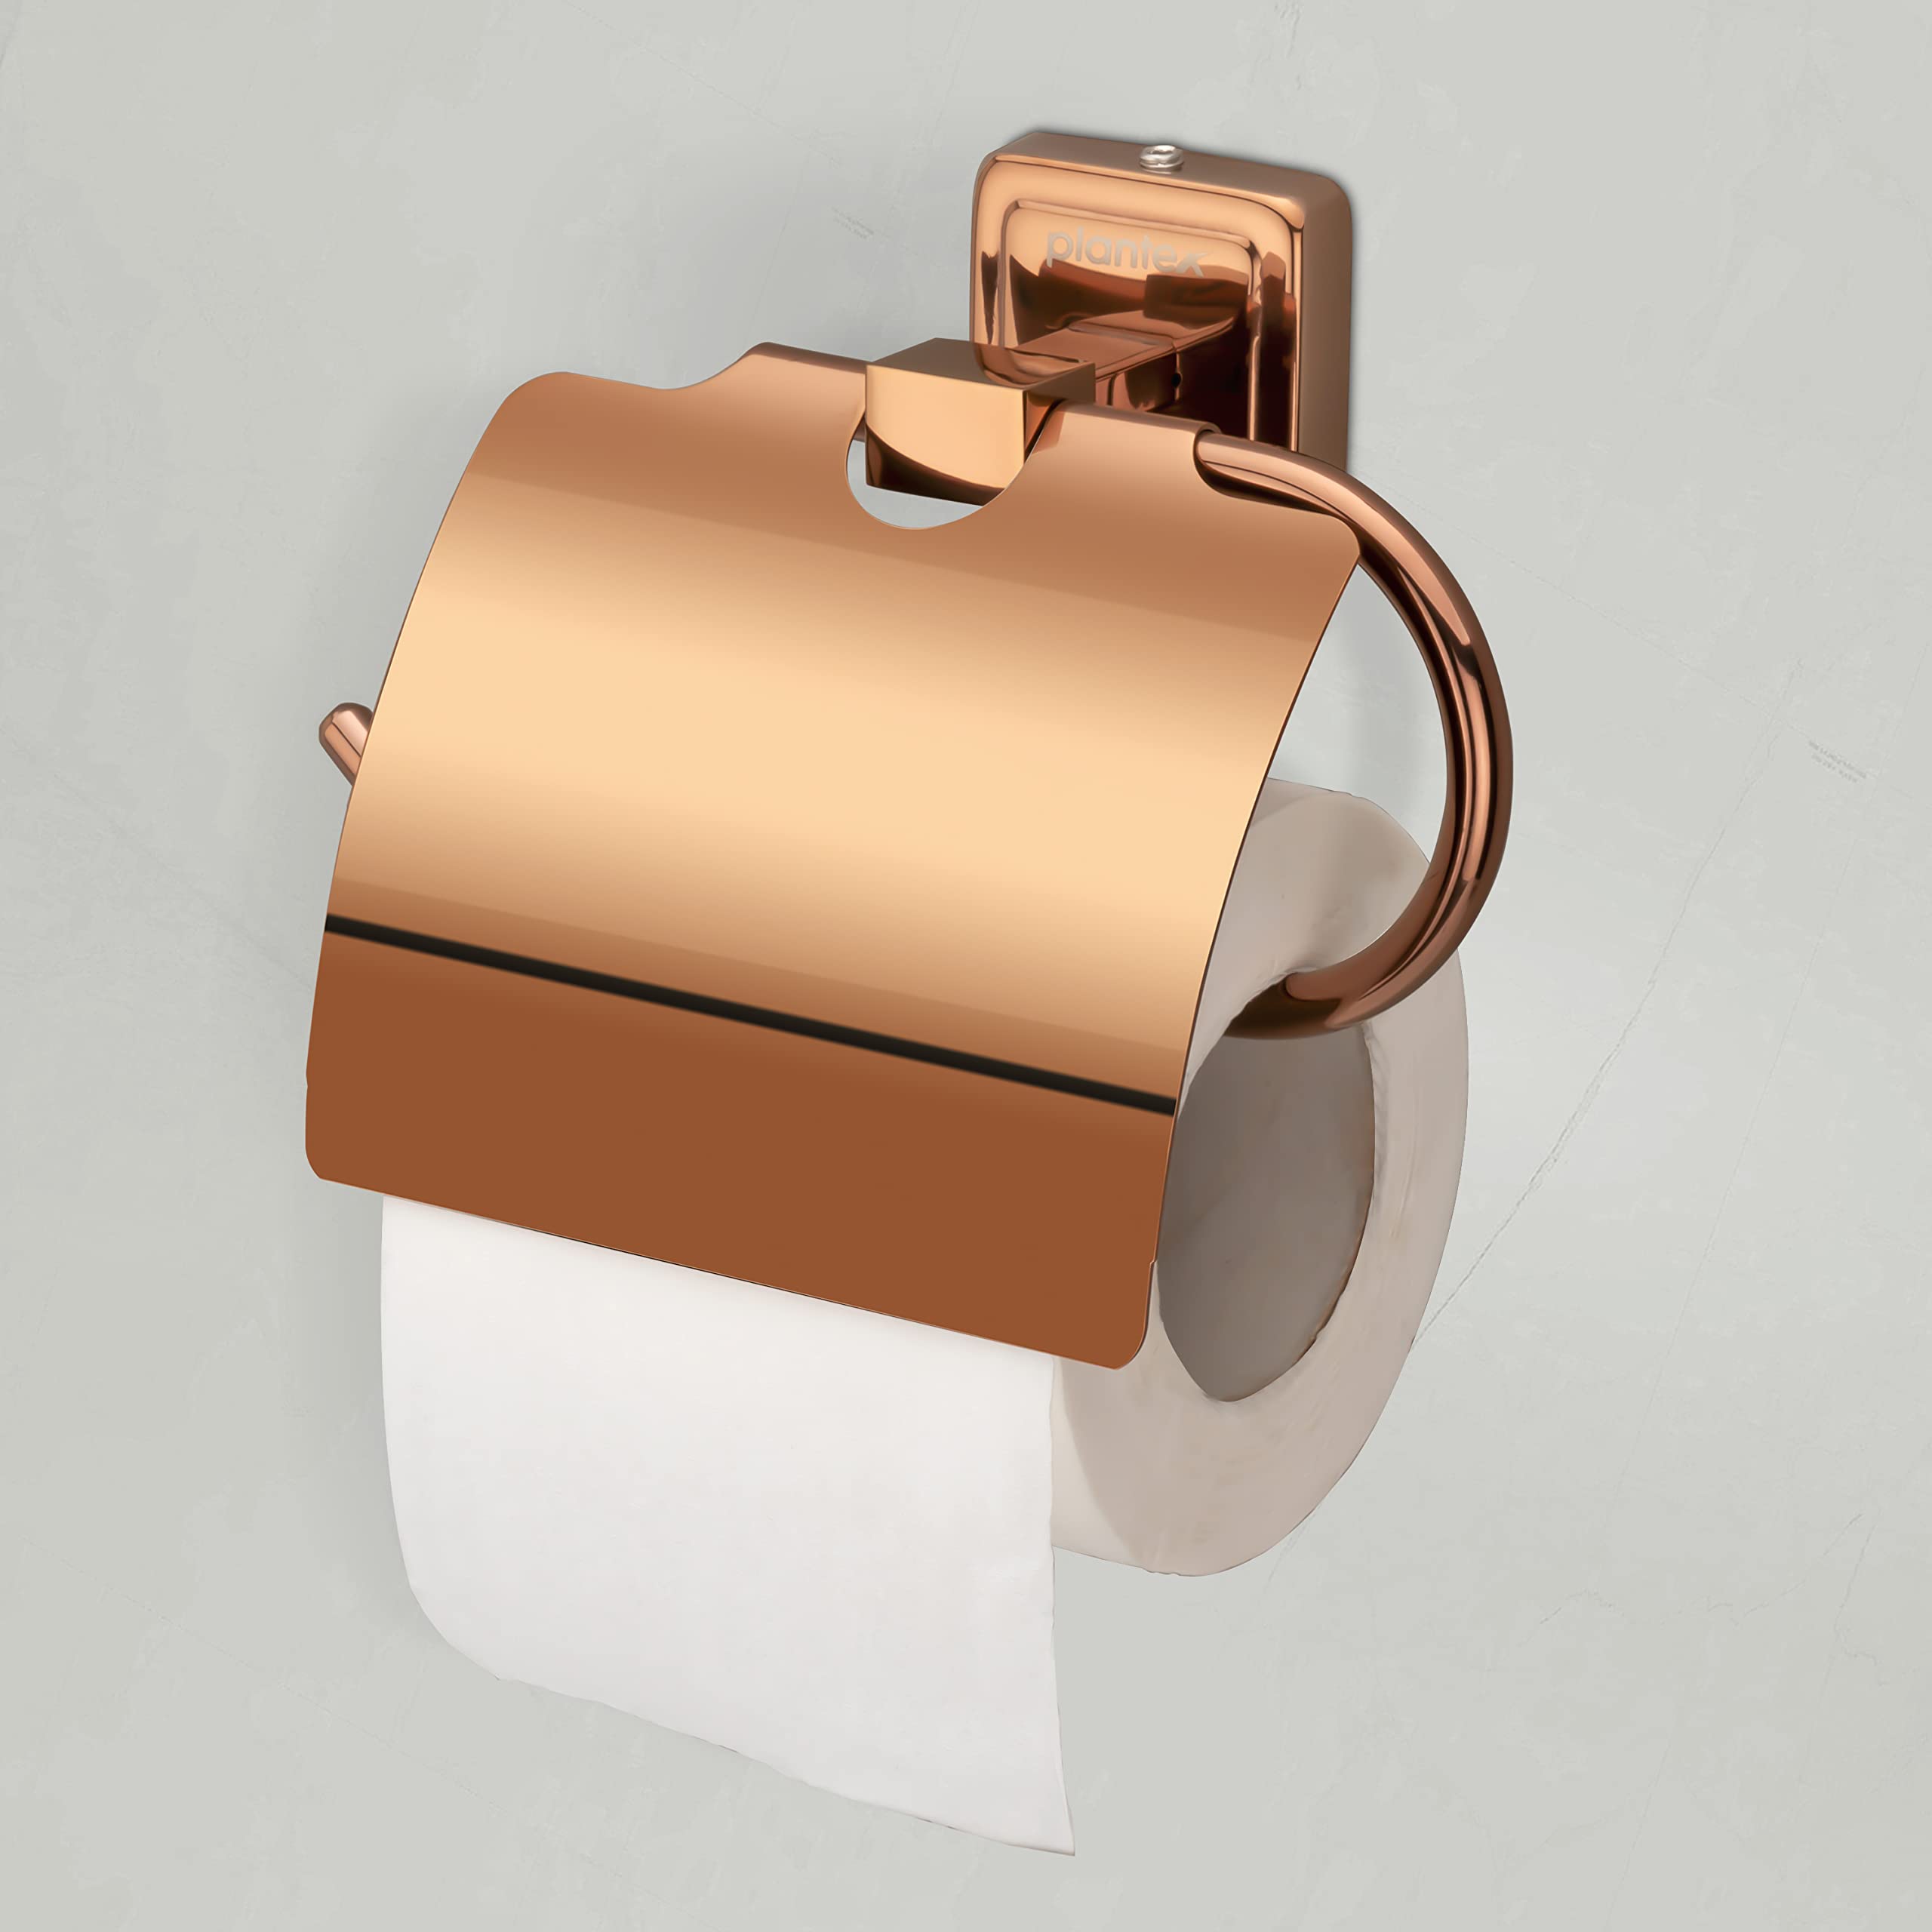 Plantex 304 Grade Stainless Steel Decan Toilet Paper Roll Holder/Tissue Paper Holder for Bathroom/Bathroom Accessories - Pack of 2 (648 - PVD Rose Gold)